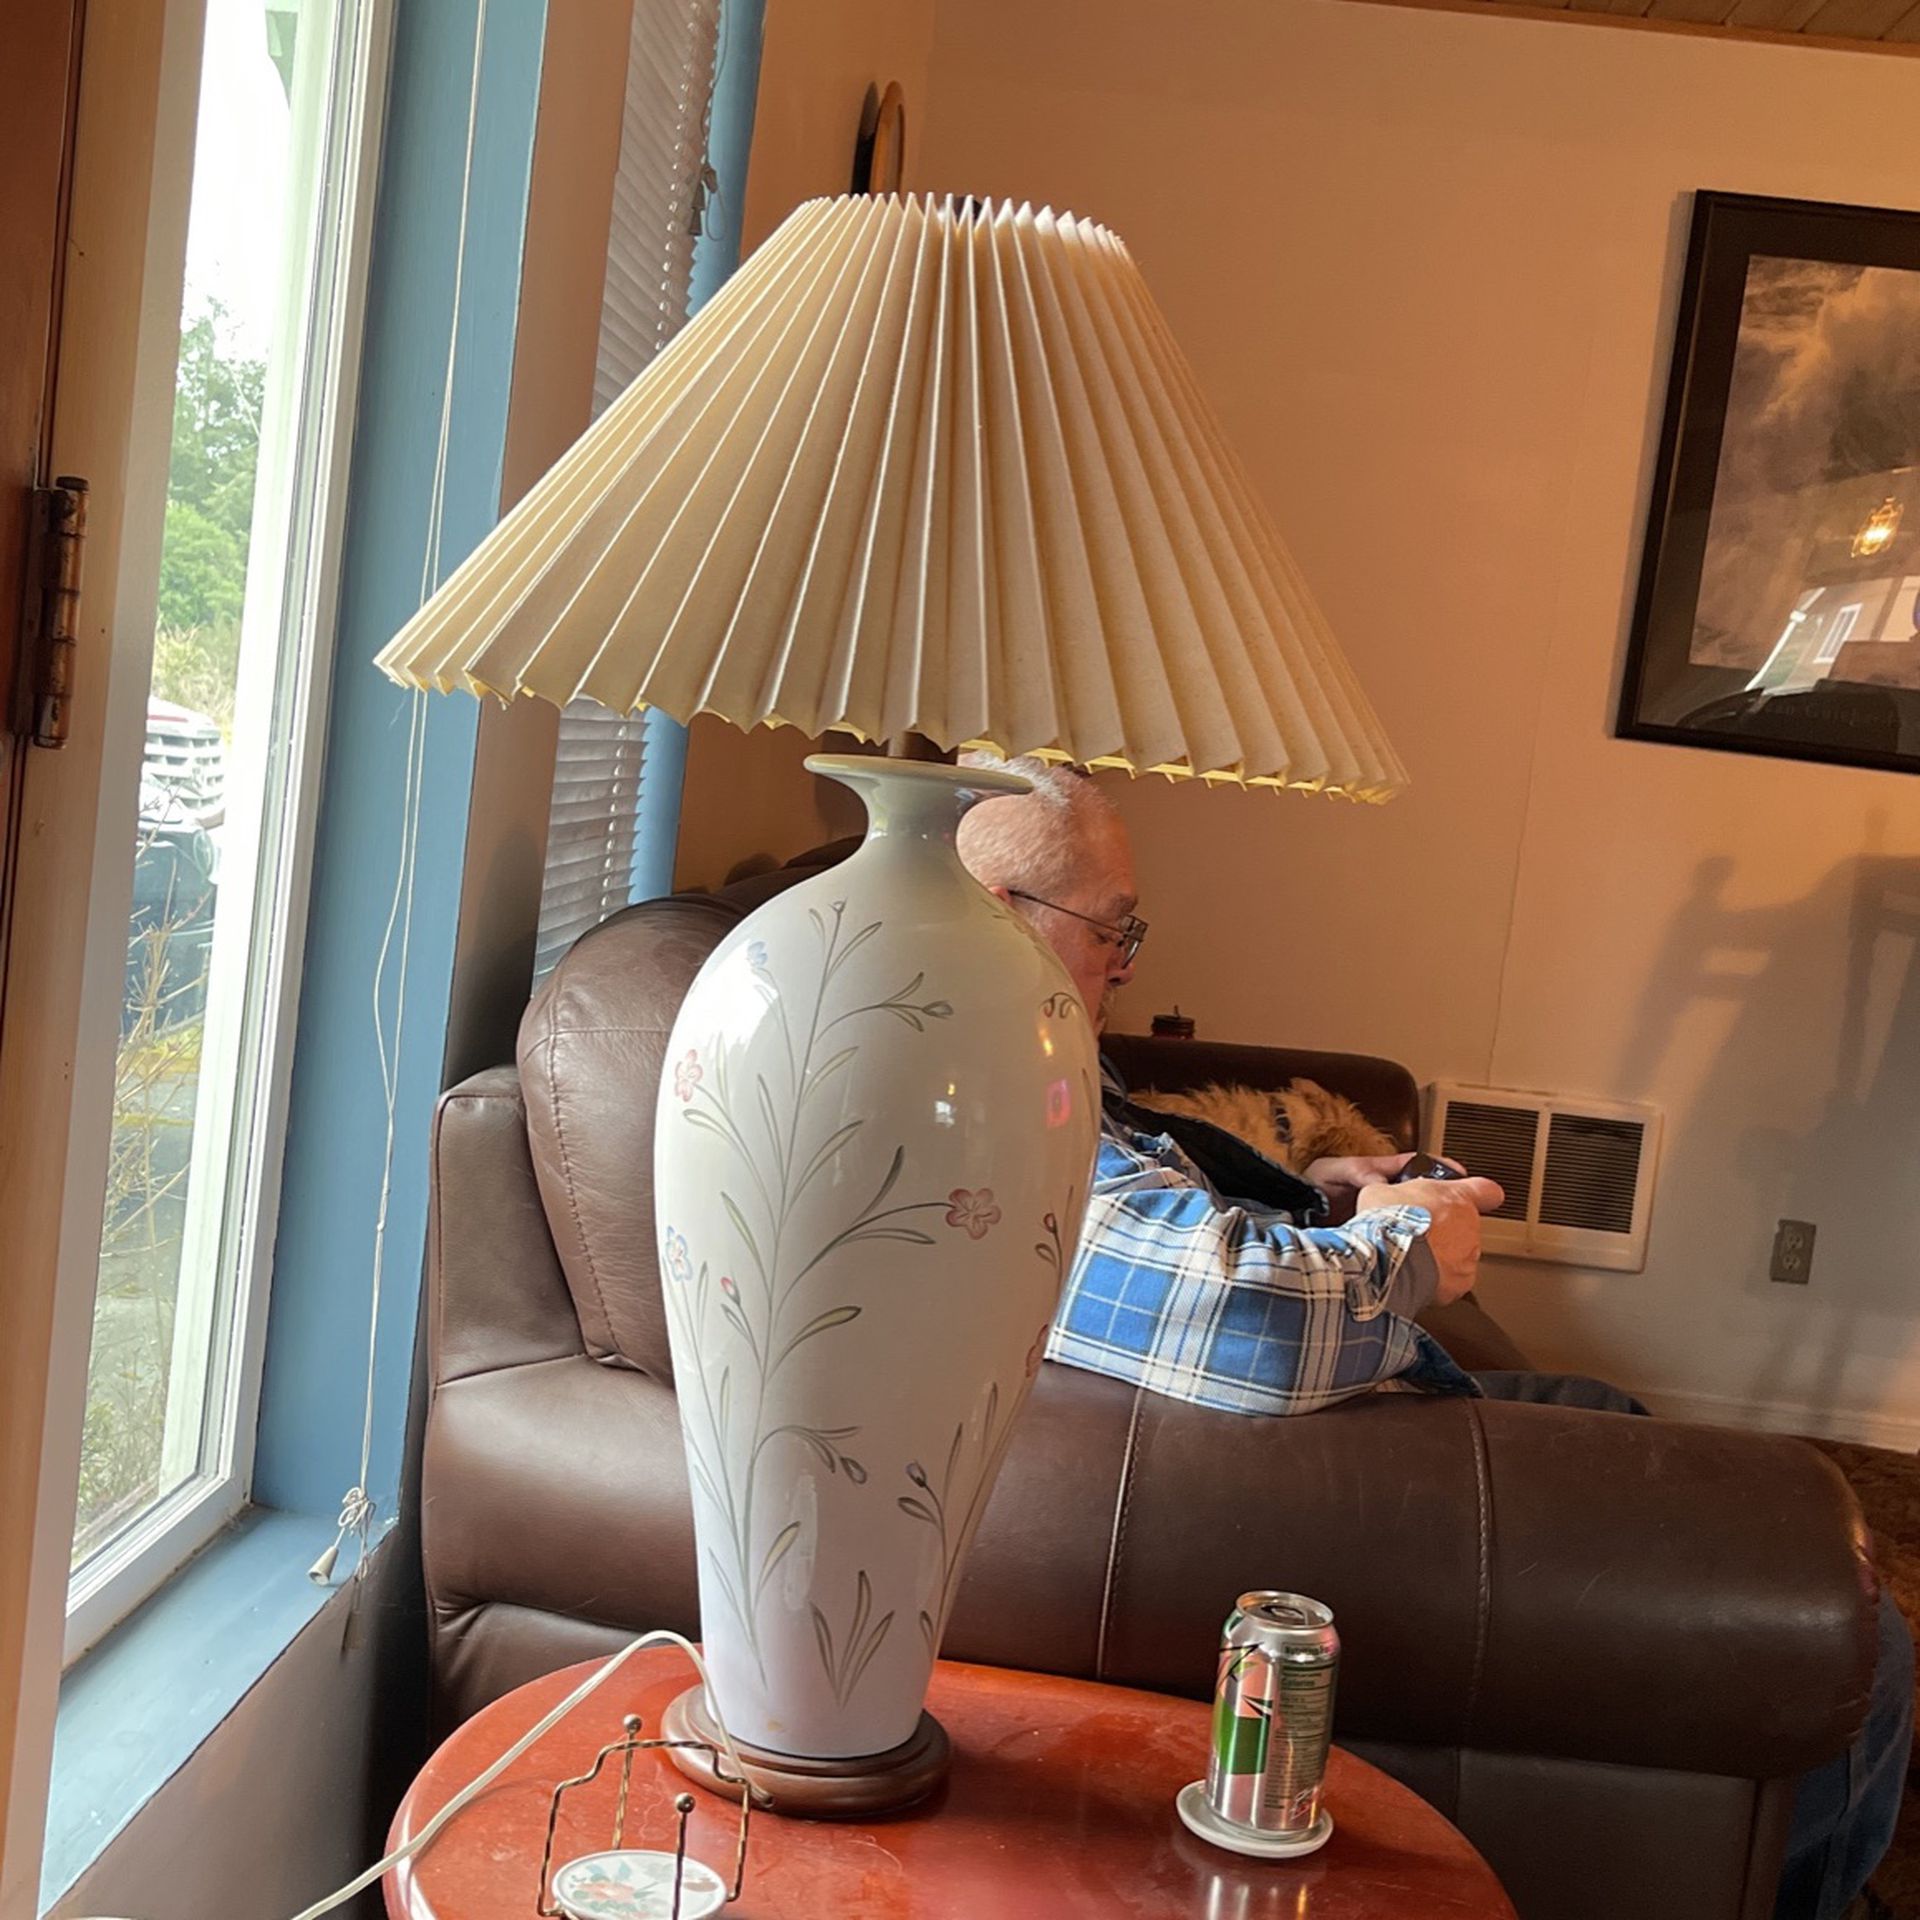 Free 2 table Lamps Must Pickup This Weekend